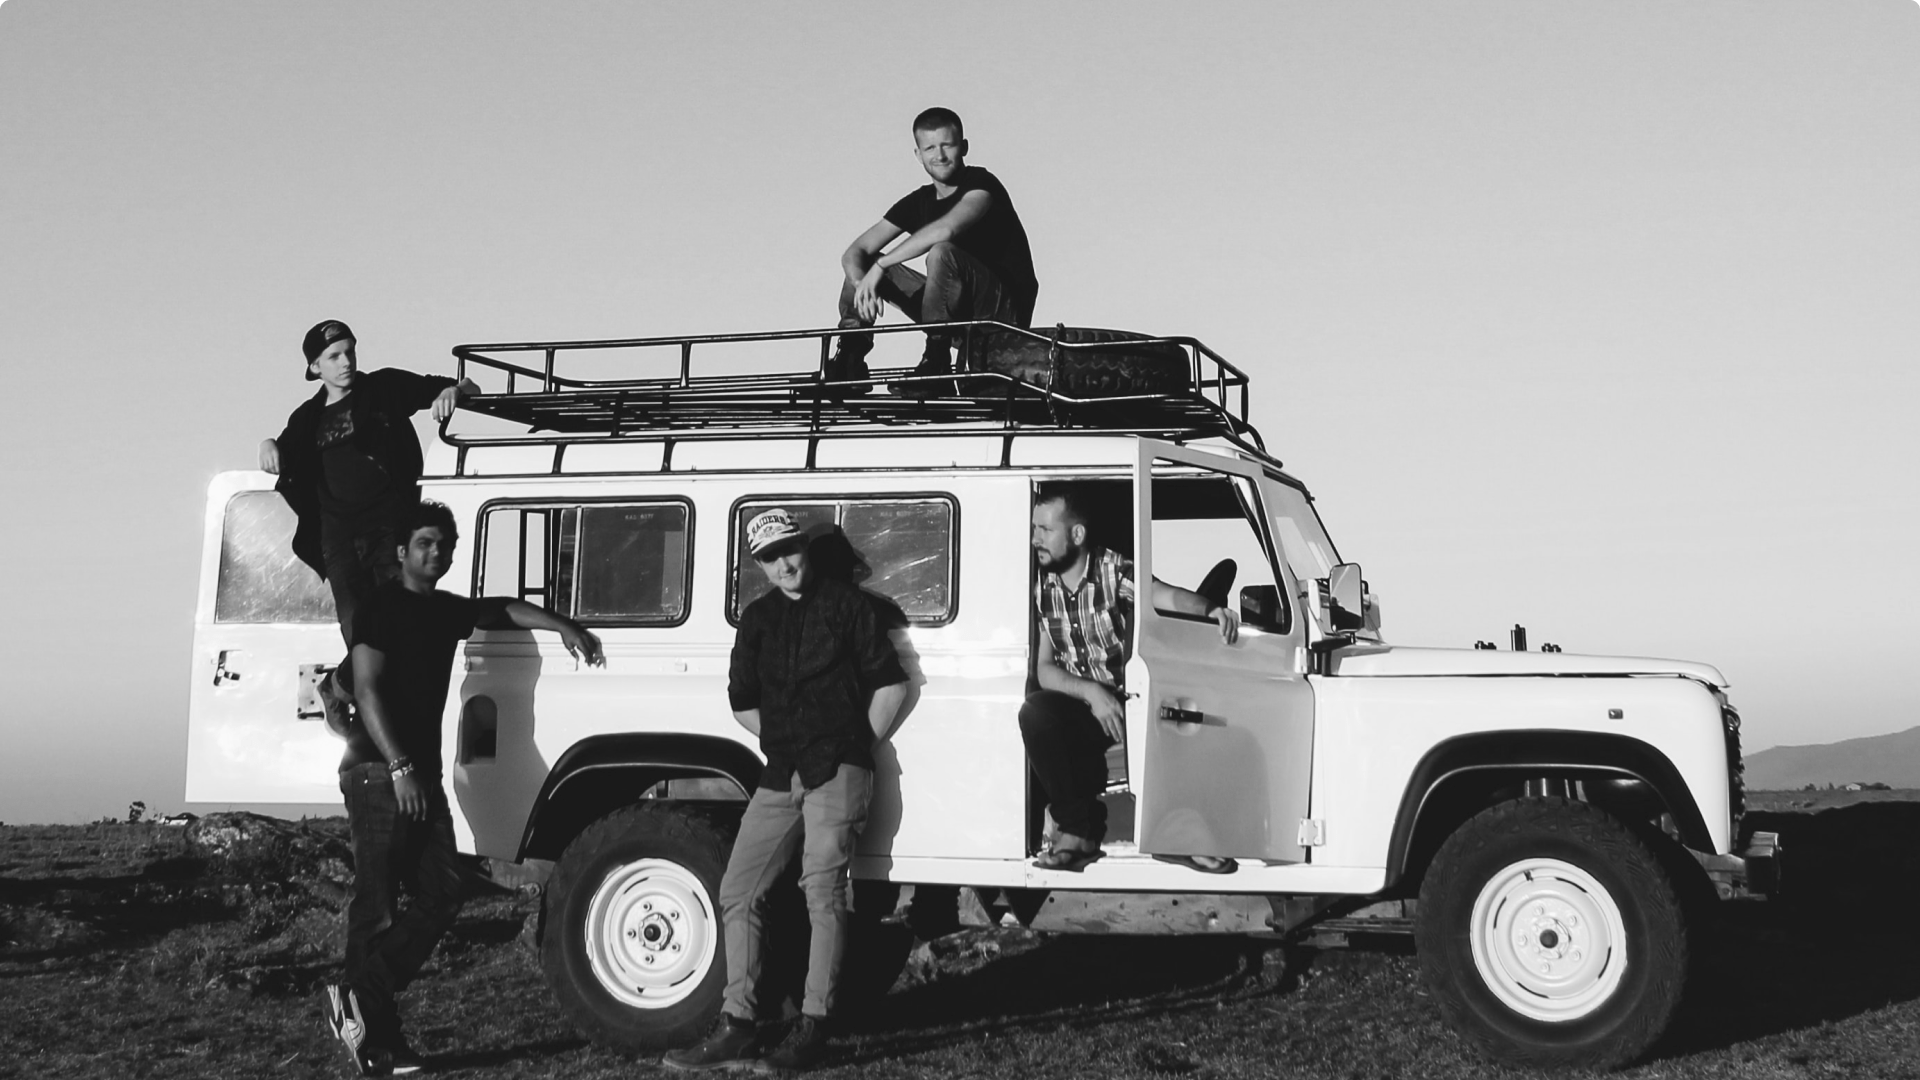 Black and white photograph of friends sitting on a Land Rover for the article How to Build Great Friendships that Thrive